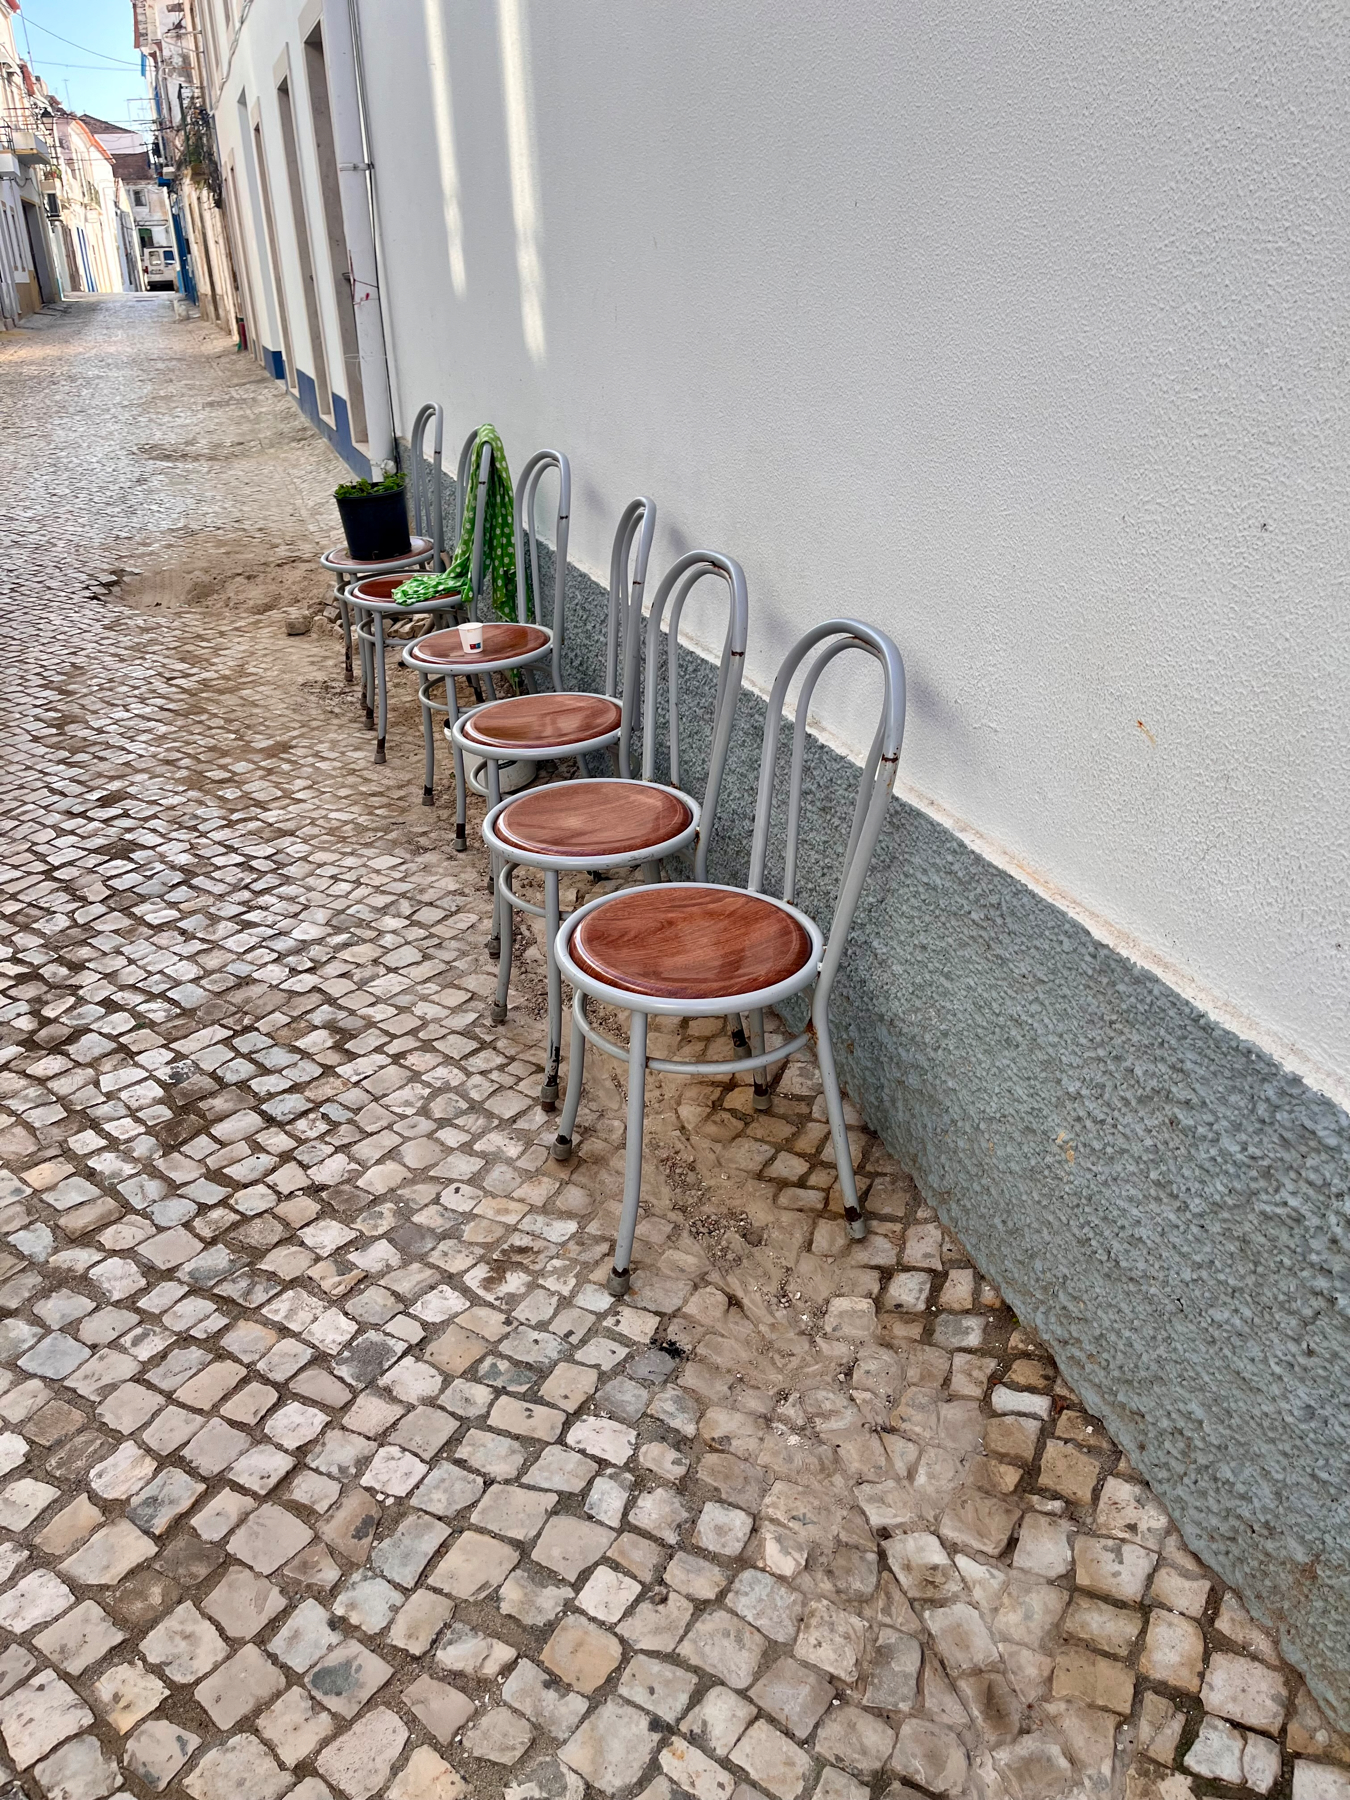 Chairs lined up outside on a tiled street